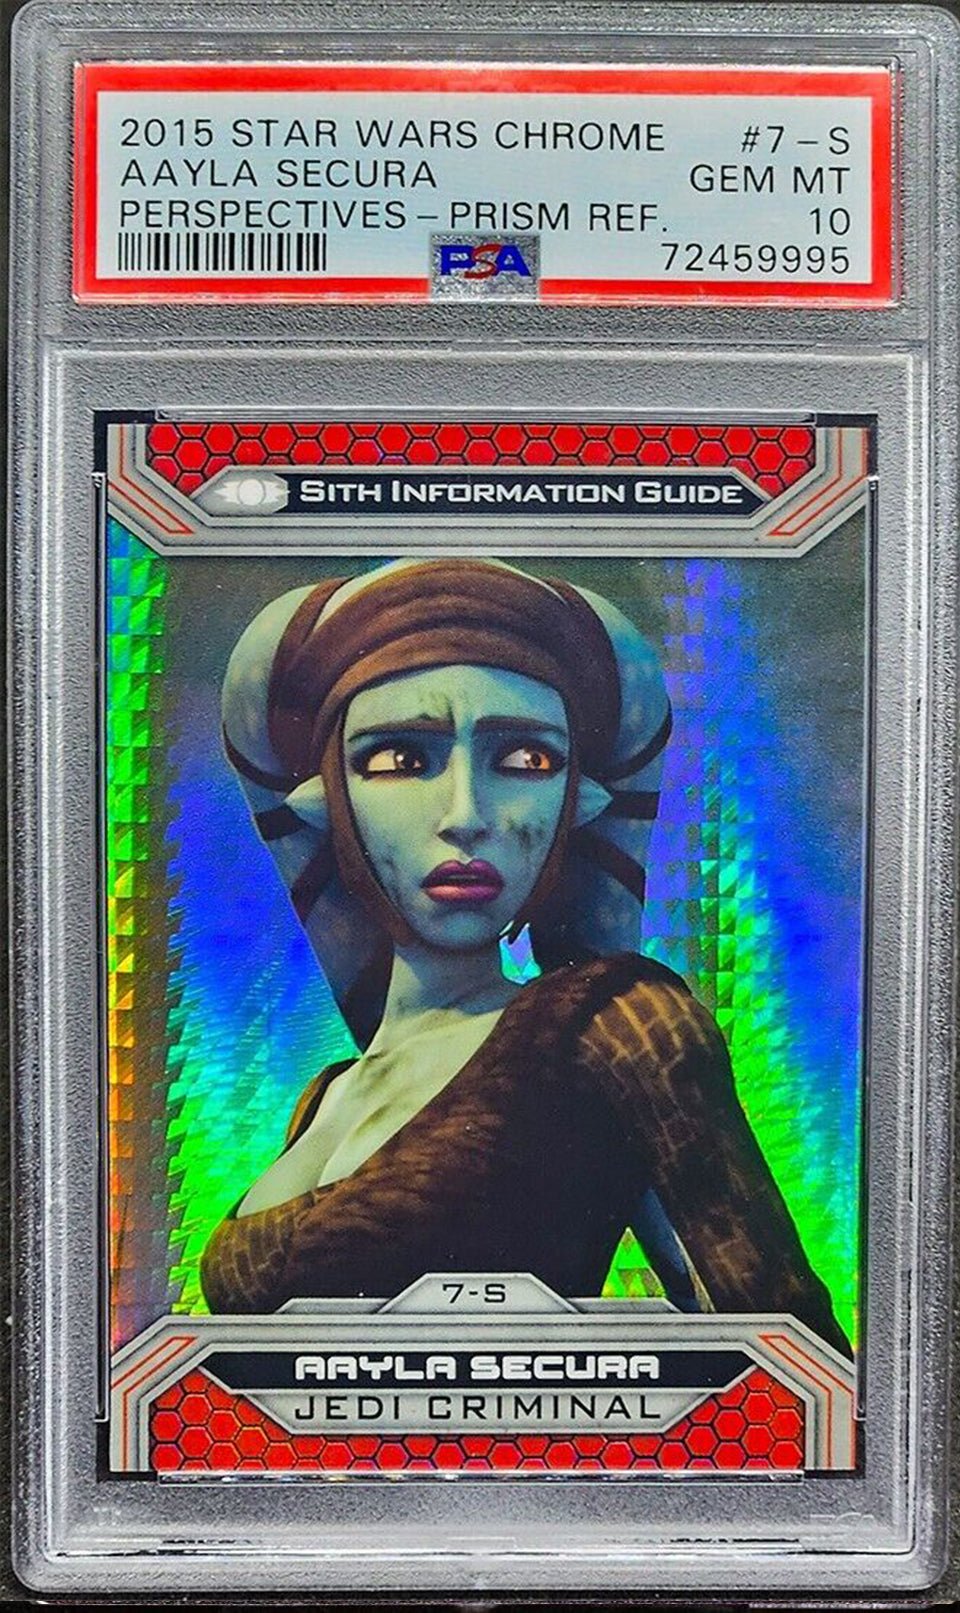 AAYLA SECURA PSA 10 2015 Star Wars Topps Chrome Prism Refractor #7-S 84/199 Star Wars Graded Cards Parallel Serial Numbered - Hobby Gems